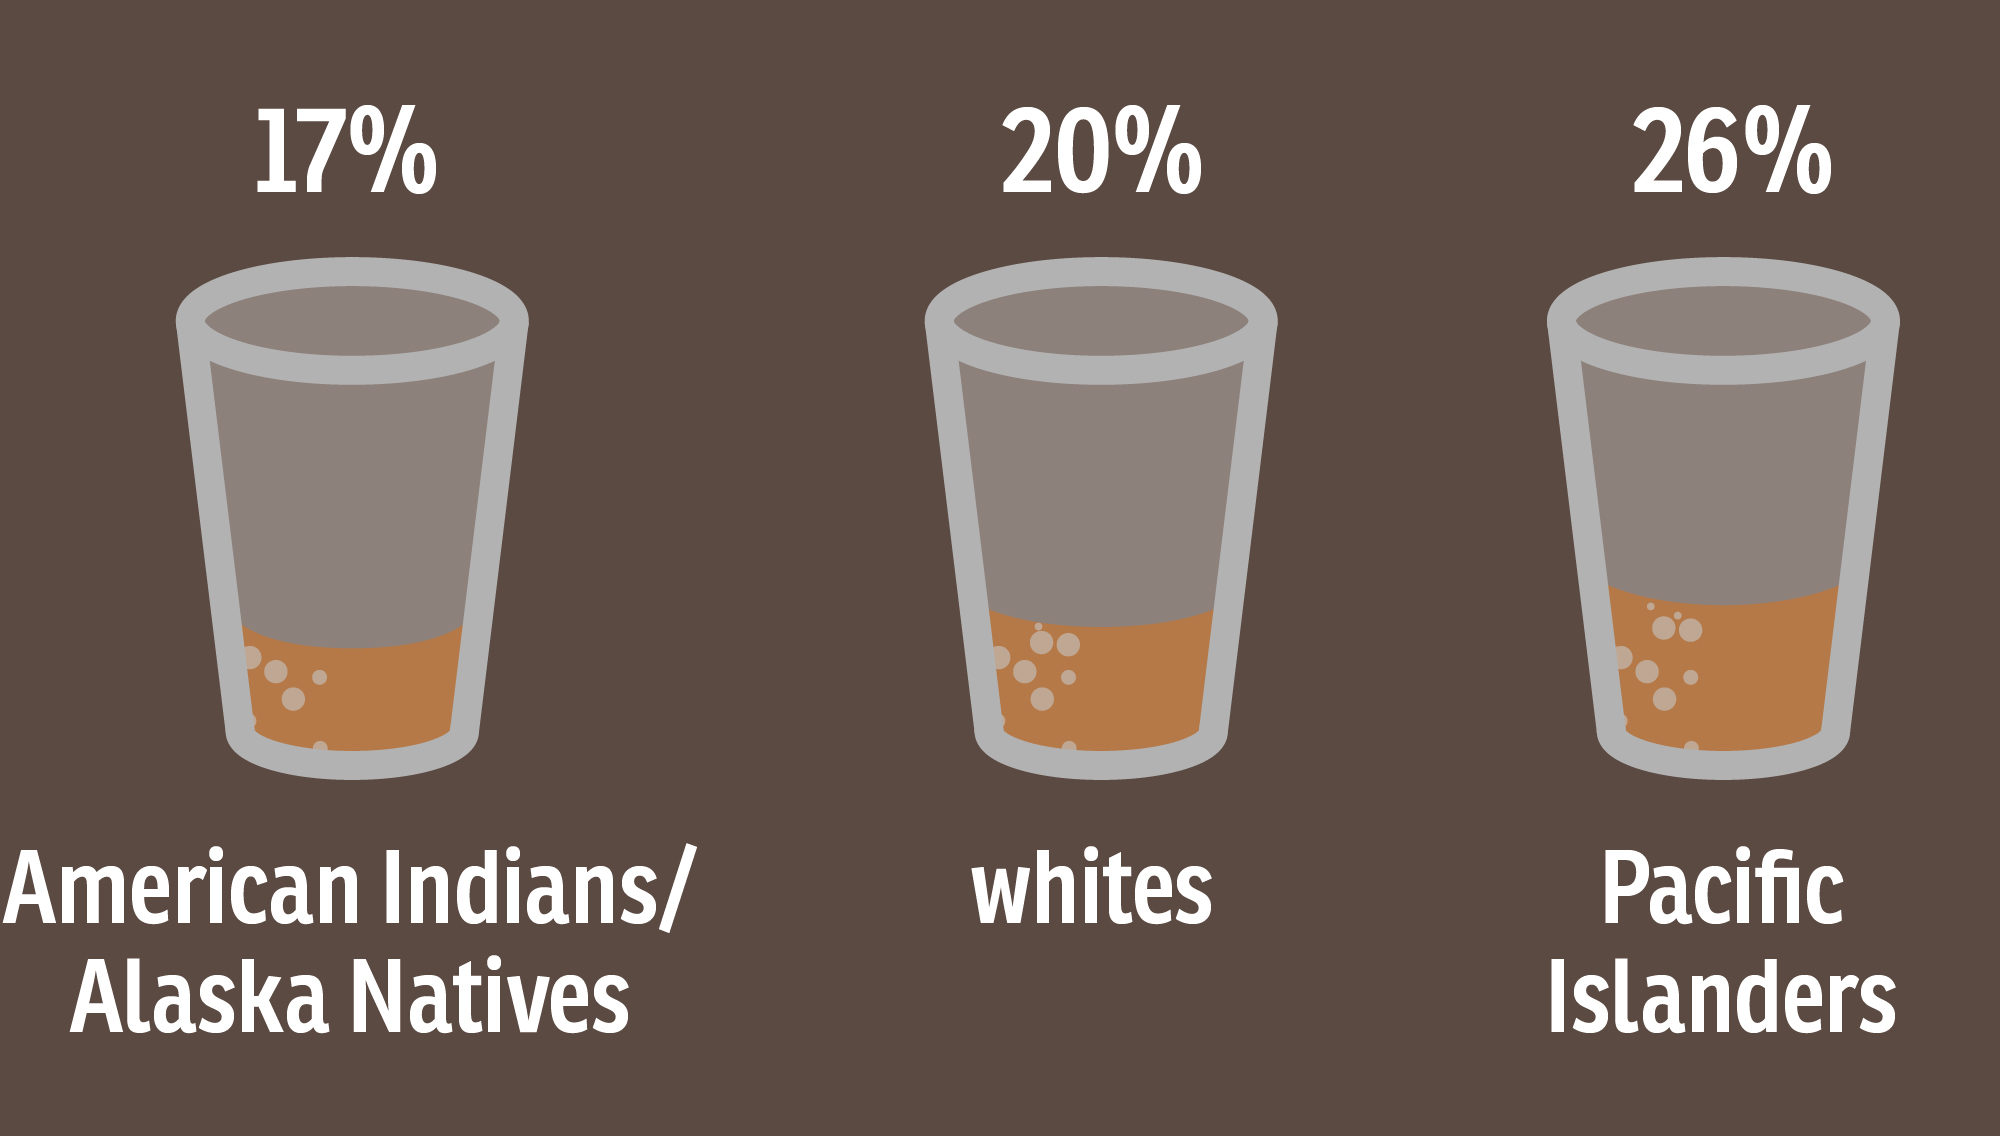 Three three glasses. The first one filled at 17% that says American Indians/Alaska Natives. The second glass filled at 20% says whites. The third glass filled at 26% says Pacific Islanders.